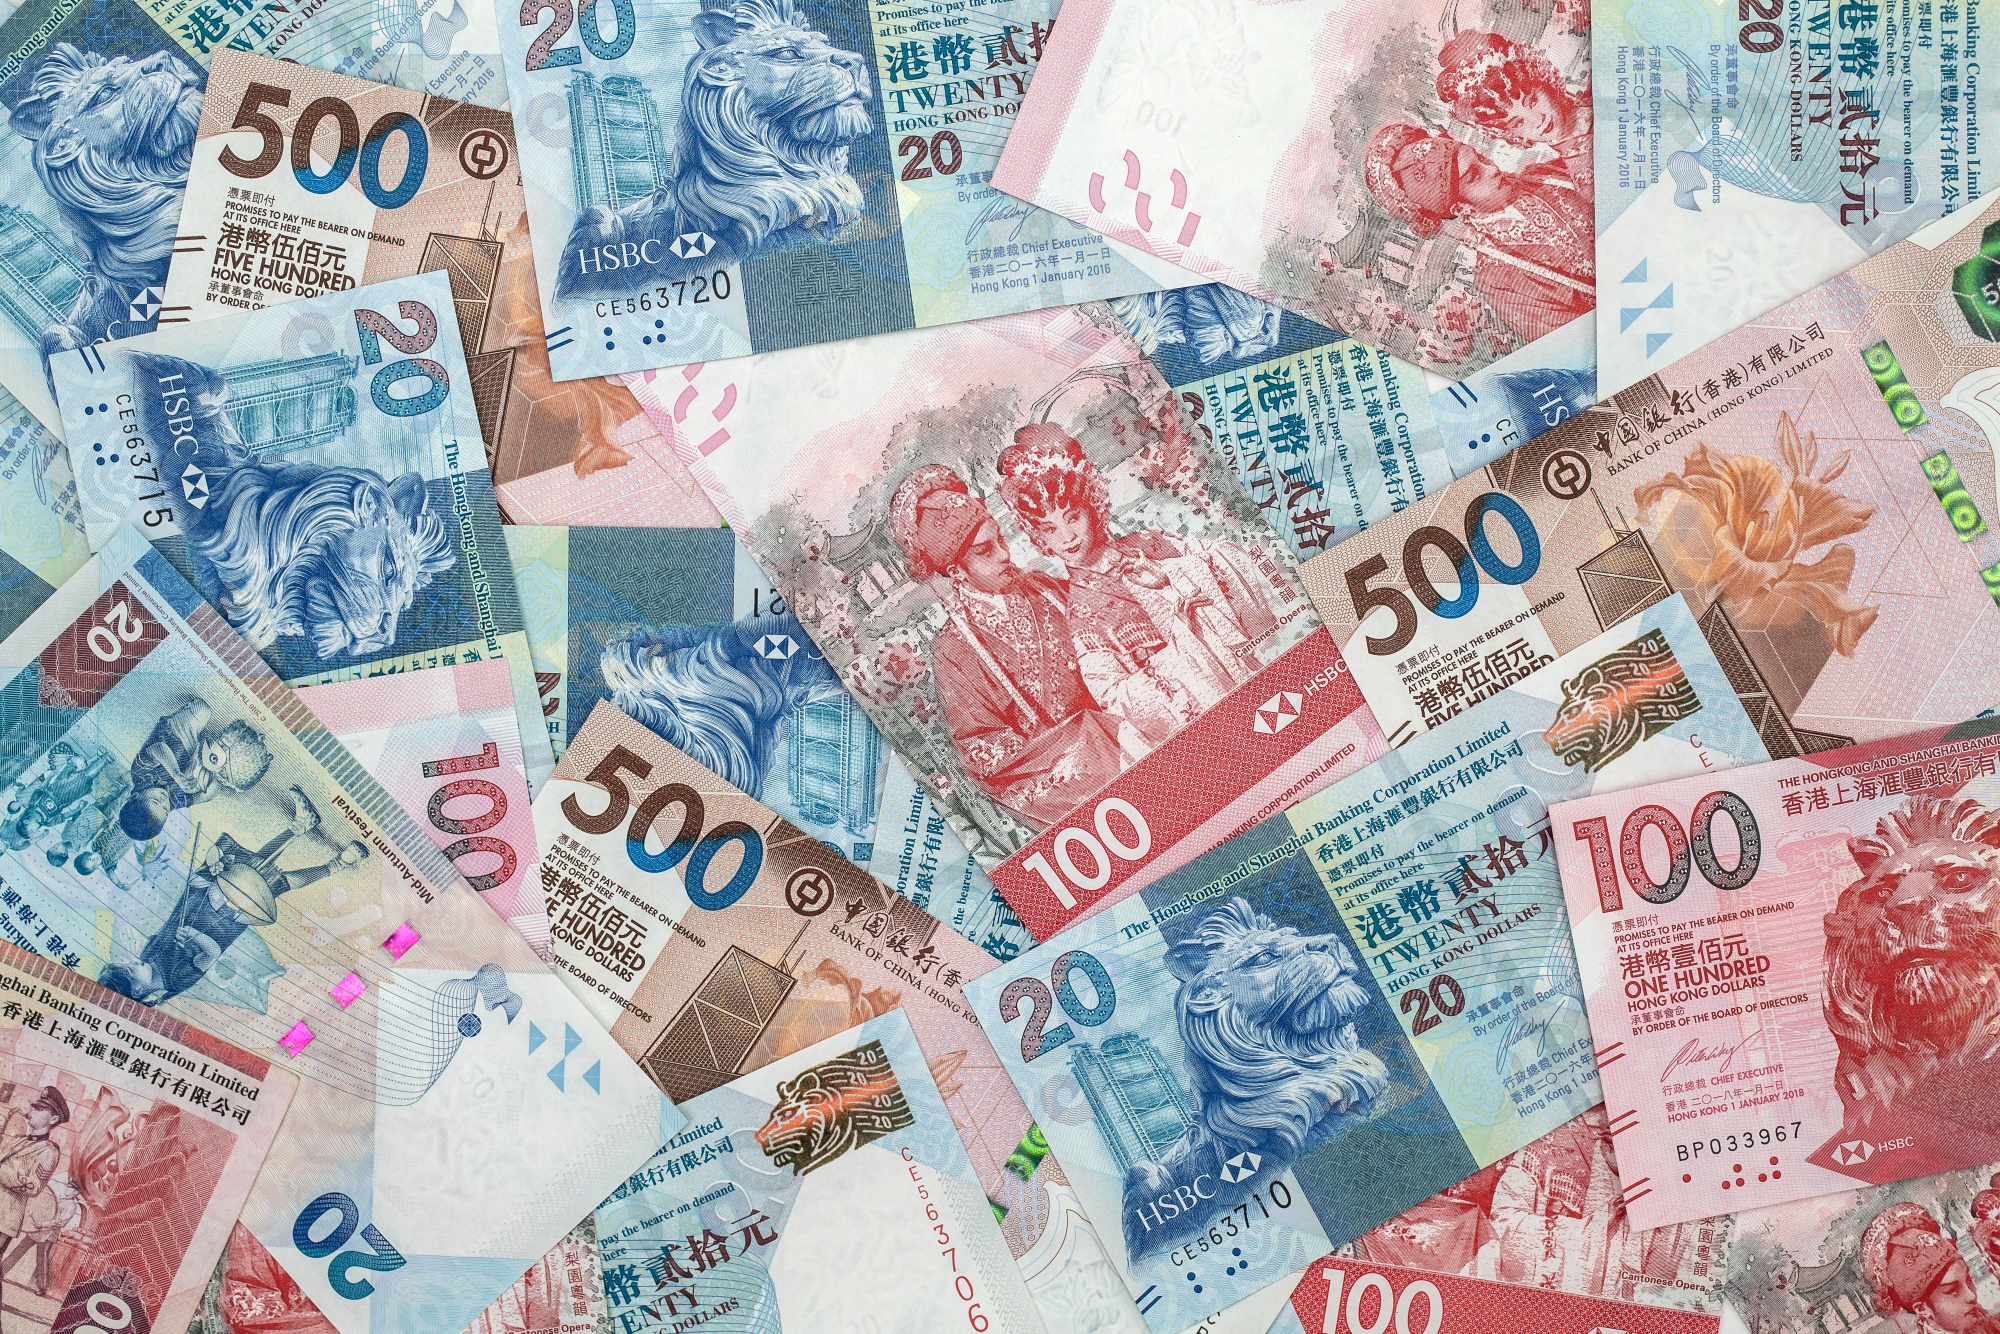 Hong Kong Dollar, Chinese Yuan and US Dollar Banknotes As Currency Peg Intervention From HKMA Continues Into Third Day